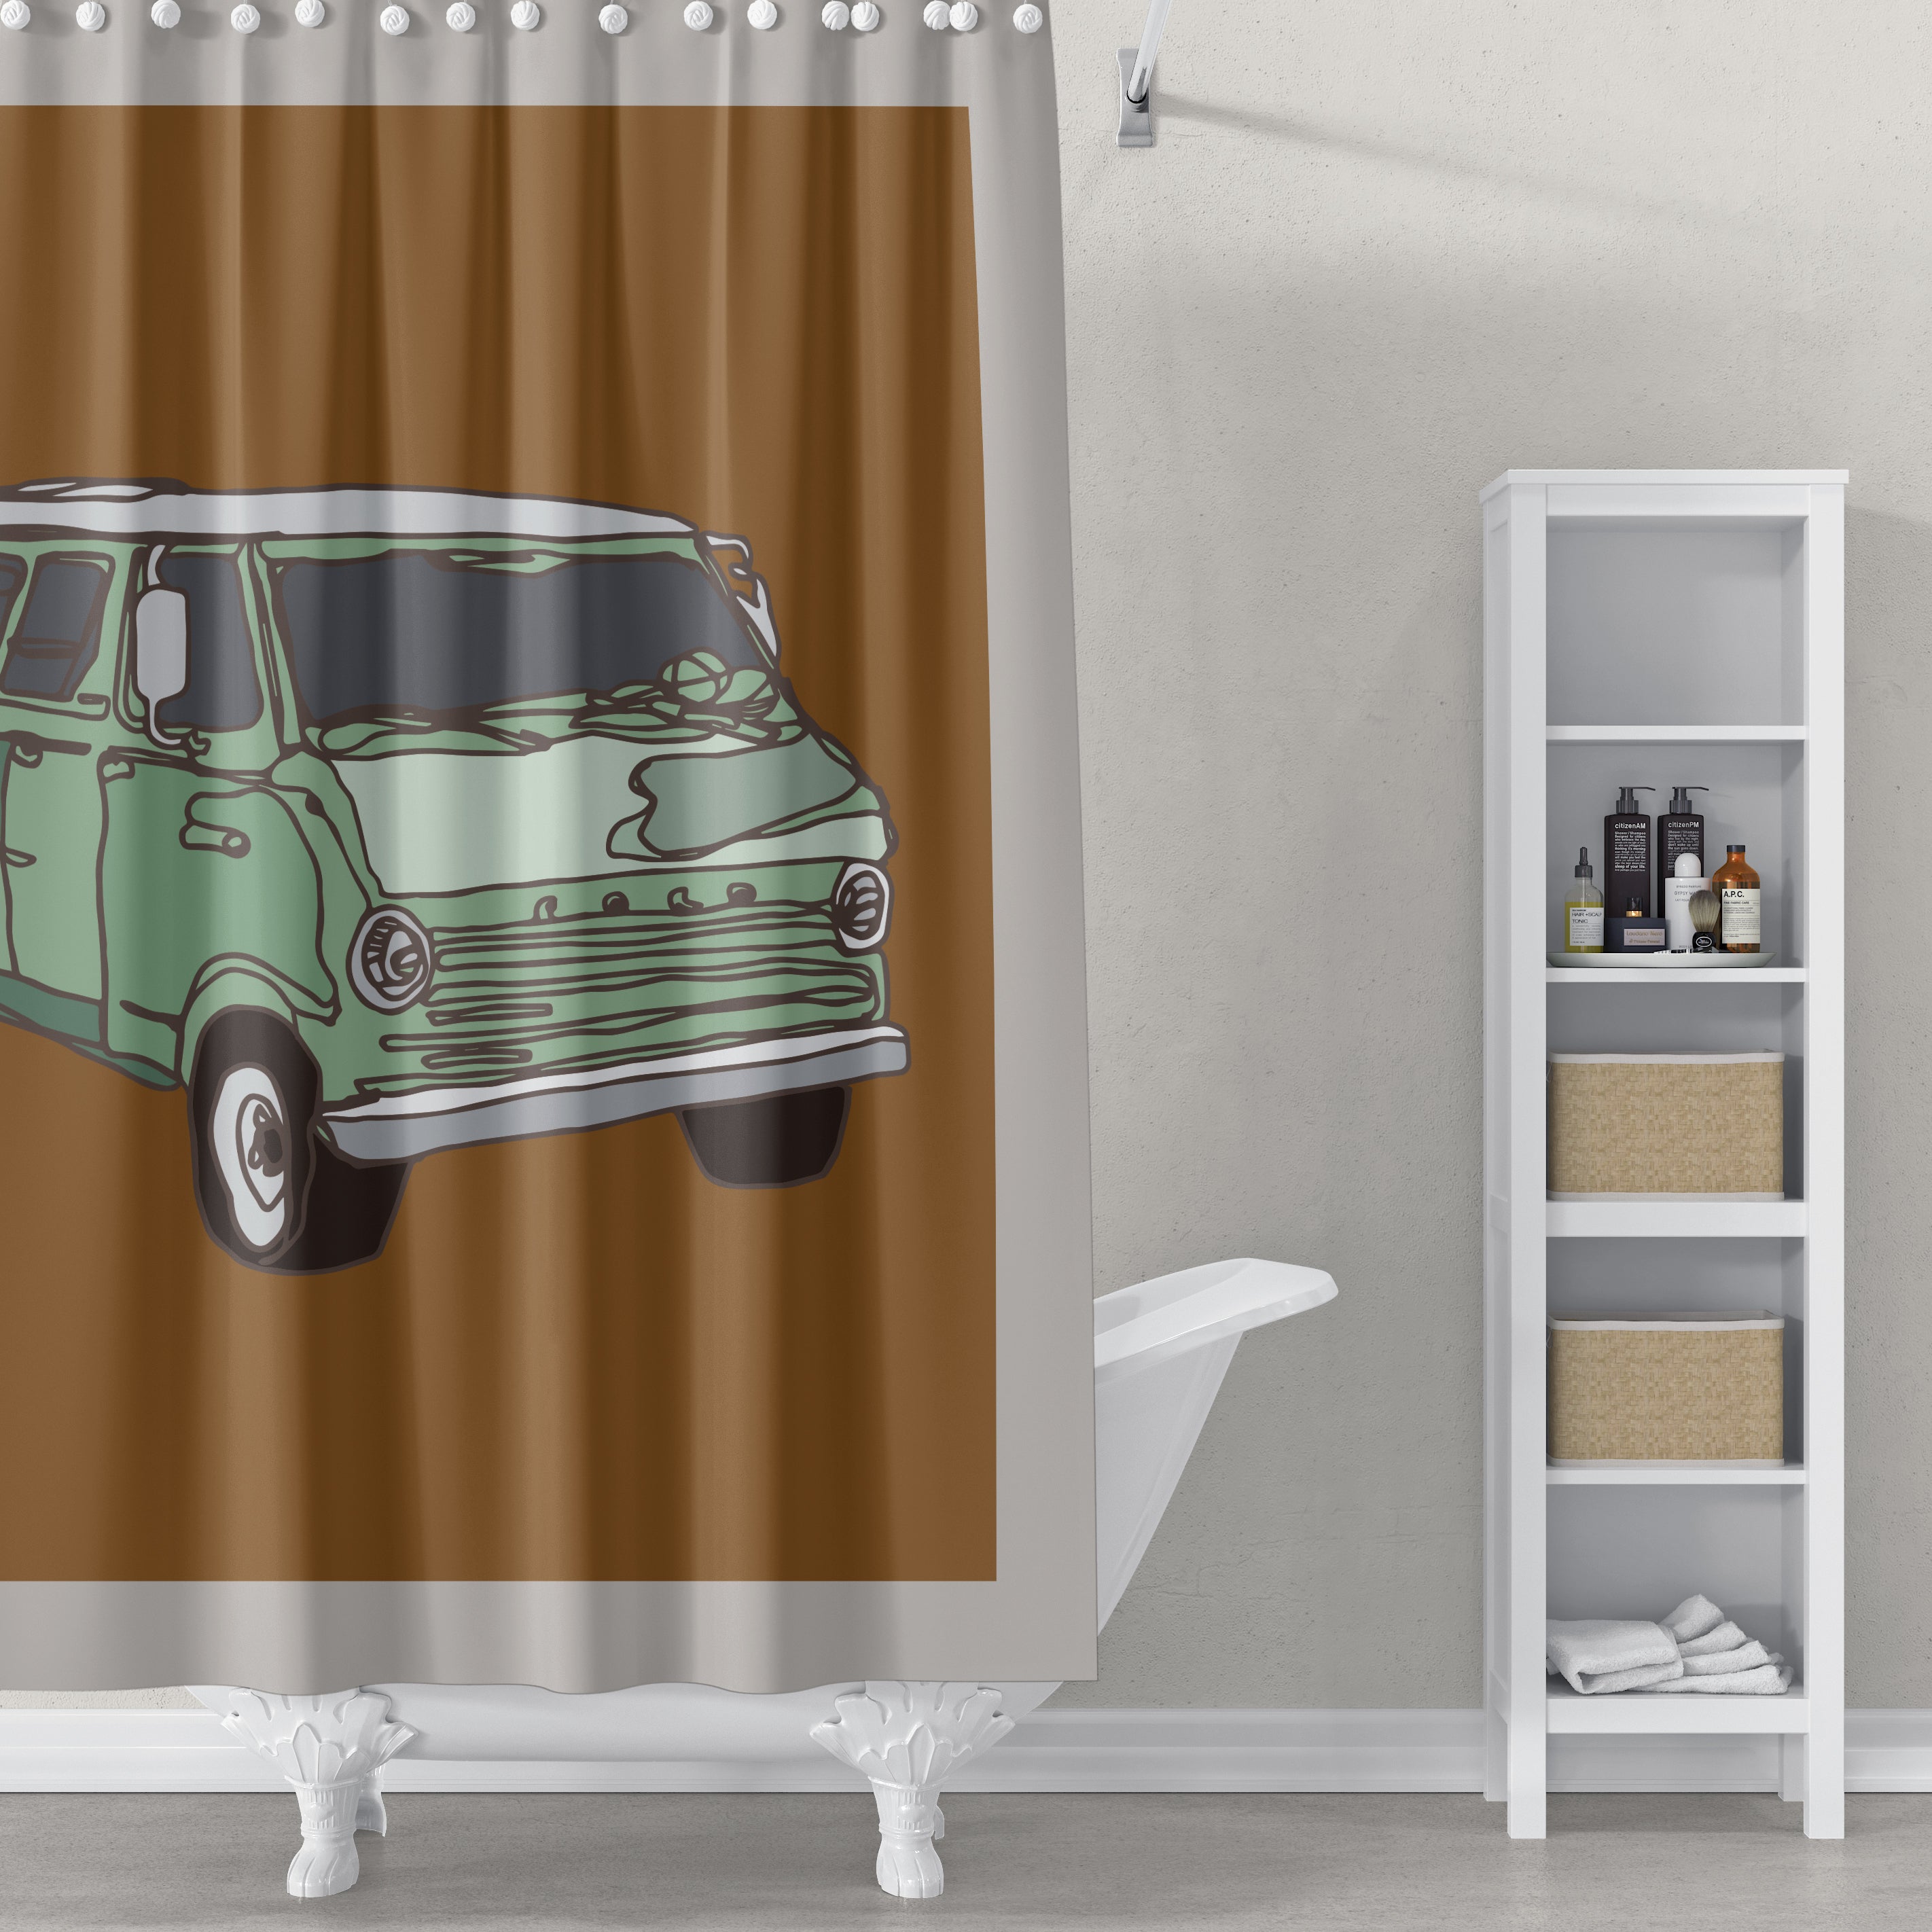 The Old Green Van Shower Curtain